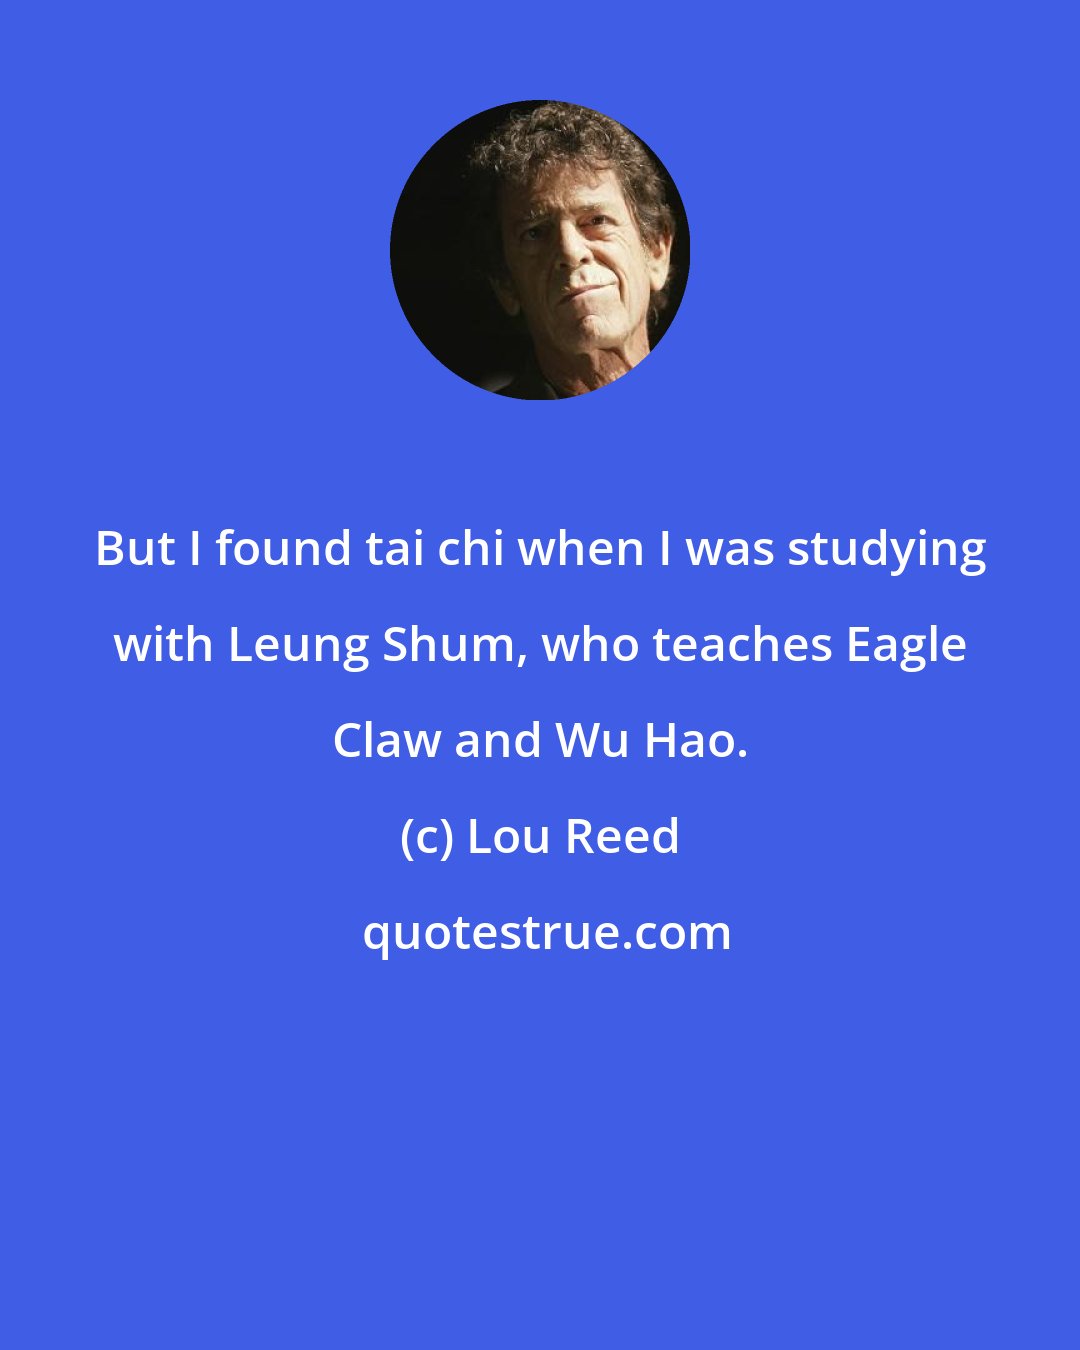 Lou Reed: But I found tai chi when I was studying with Leung Shum, who teaches Eagle Claw and Wu Hao.